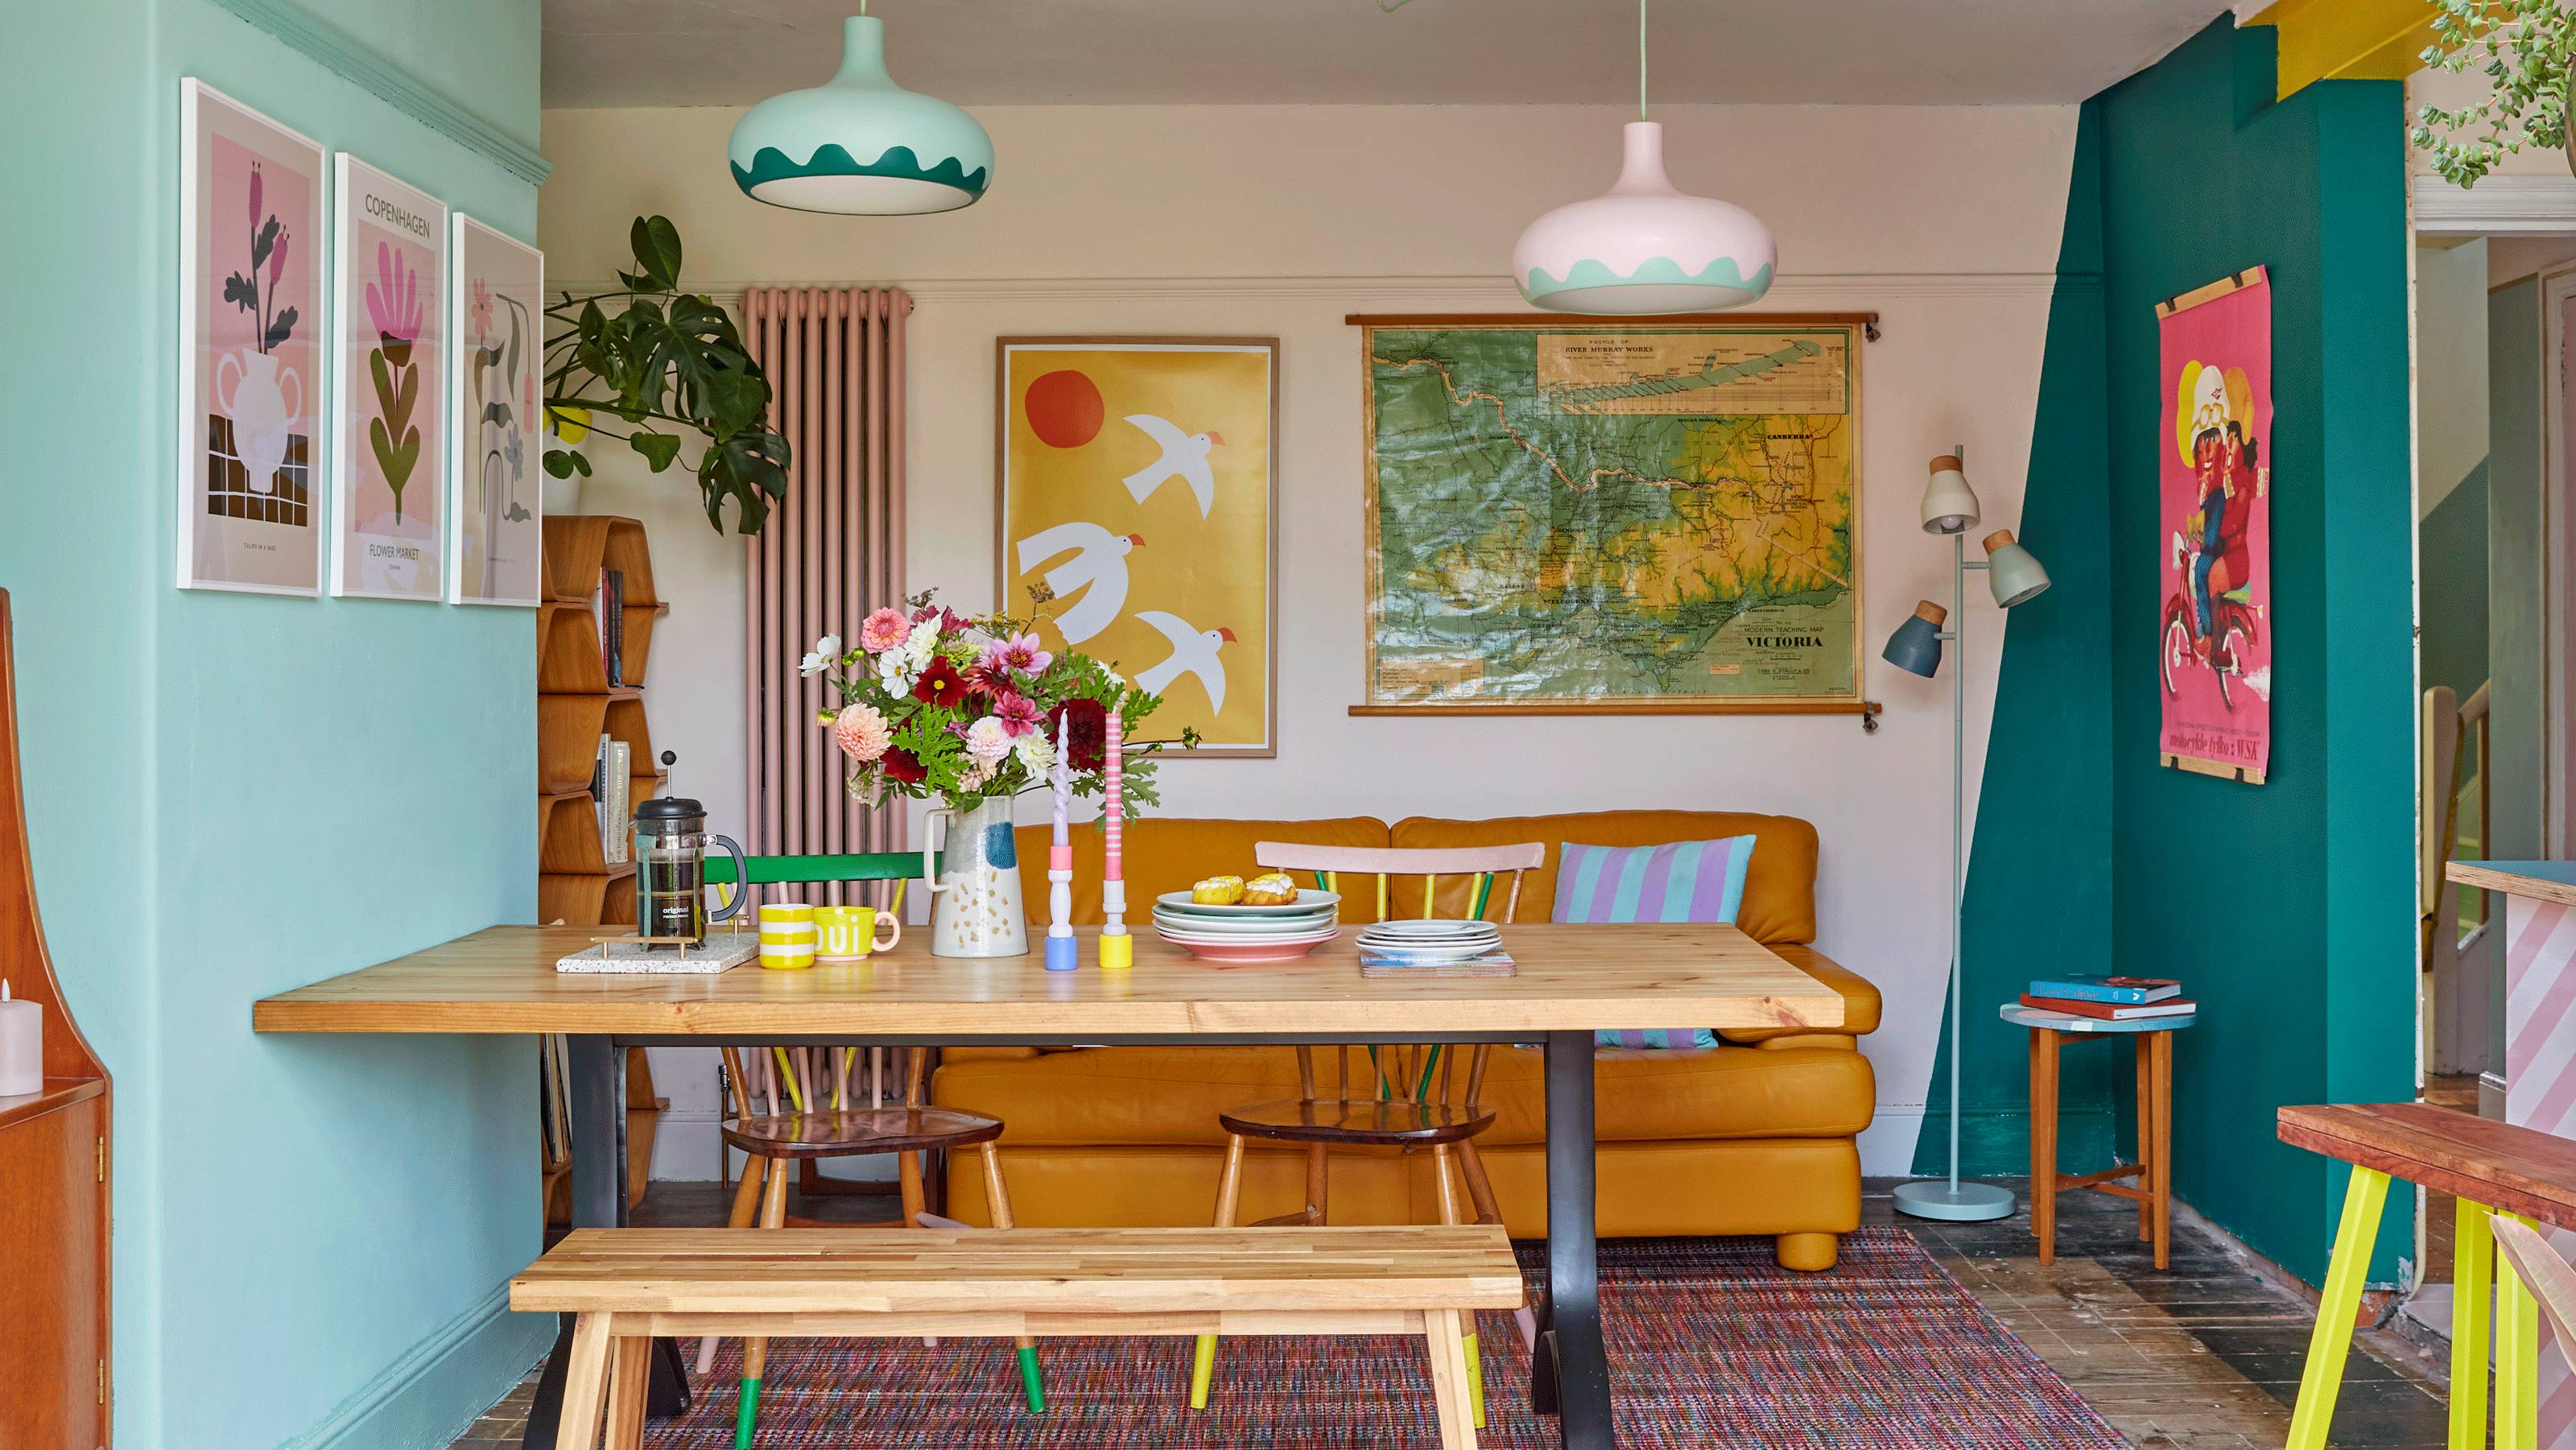 Colourful dining area with wooden table and bench and mustard yellow sofa